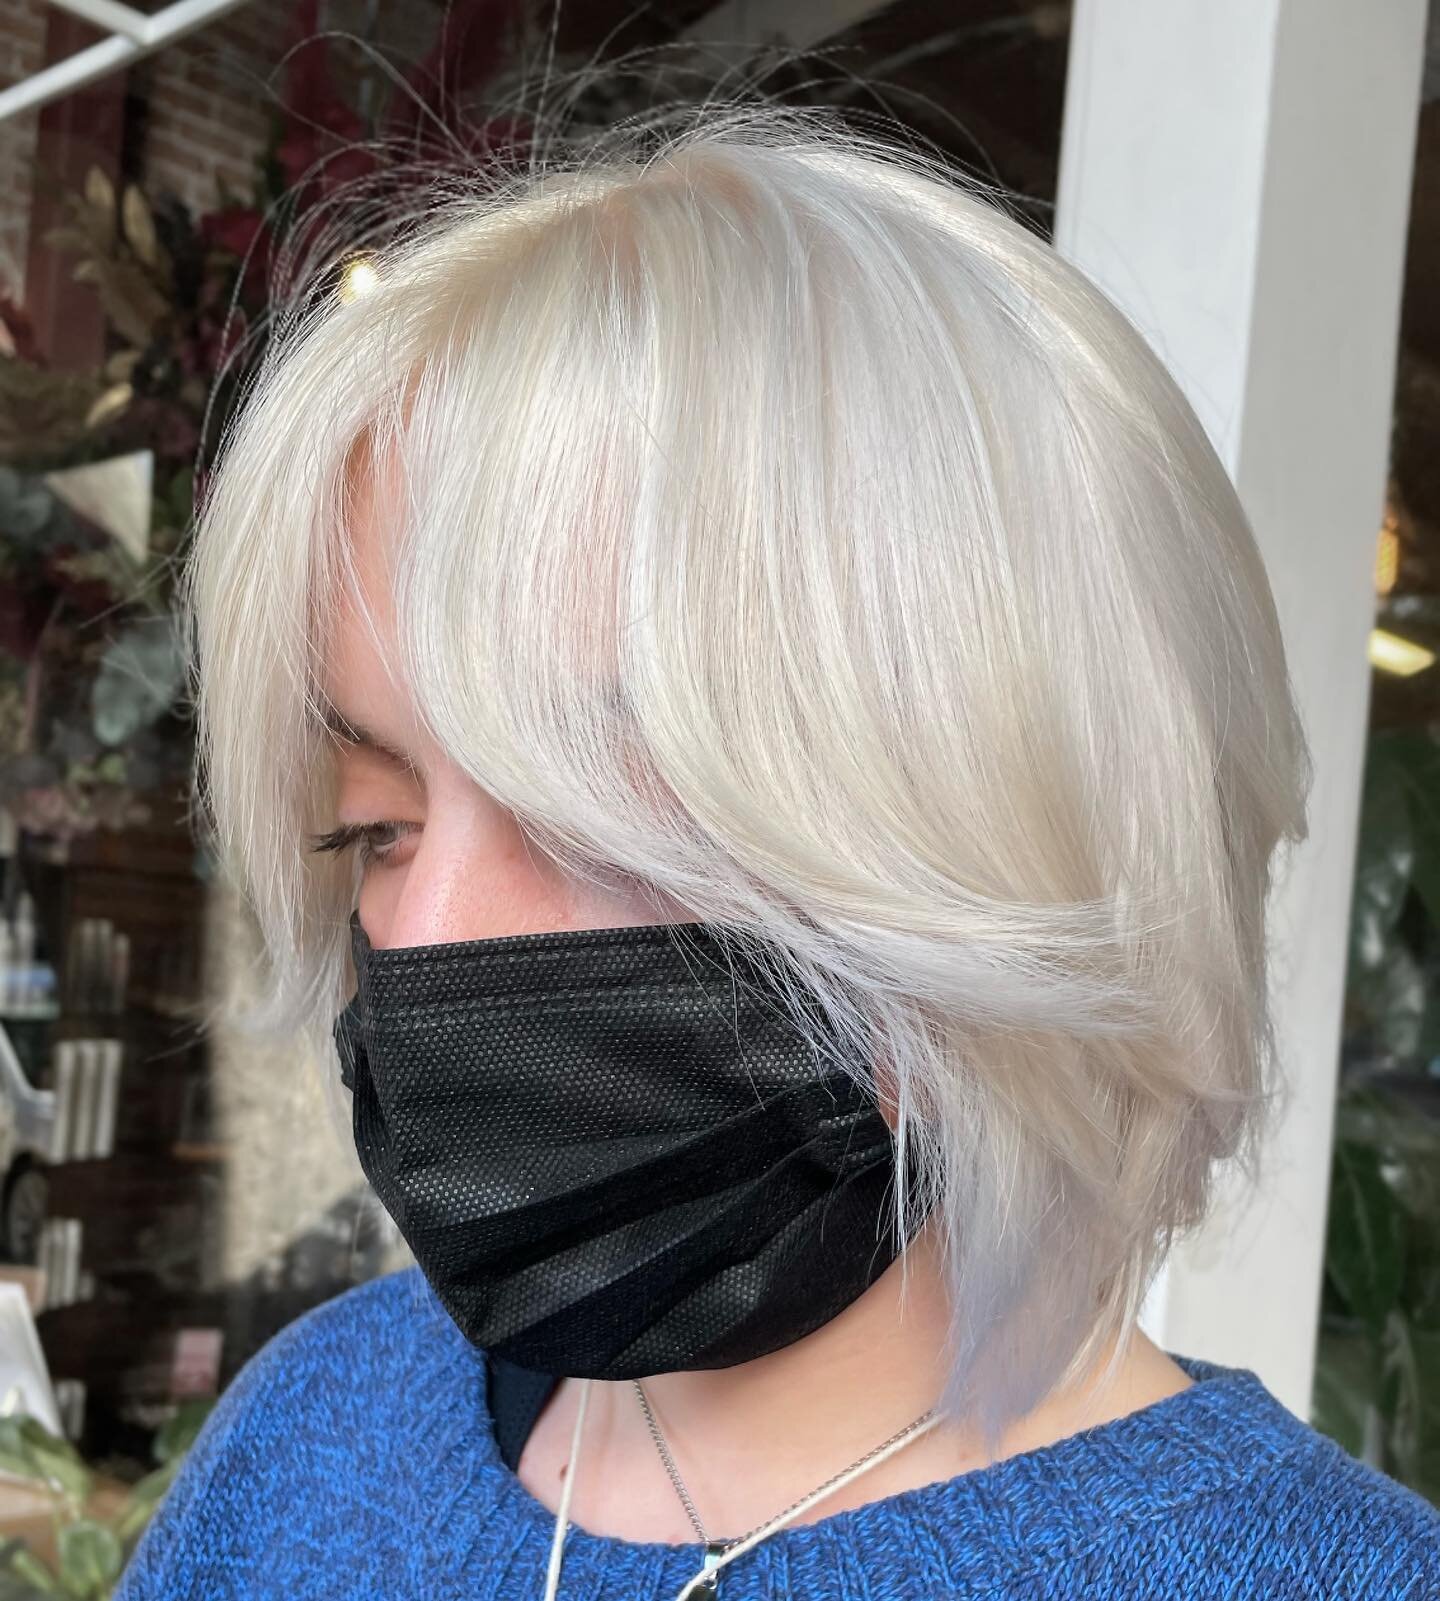 Flash freeze 😮&zwj;💨
&bull;
&bull;
&bull; Took @notanotheracademy / @hiltonsophia 's bleach specialist class recently and my bleach outs have been KILLING IT lately. We took this pic at dusk and the hair is still so reflective 🤩